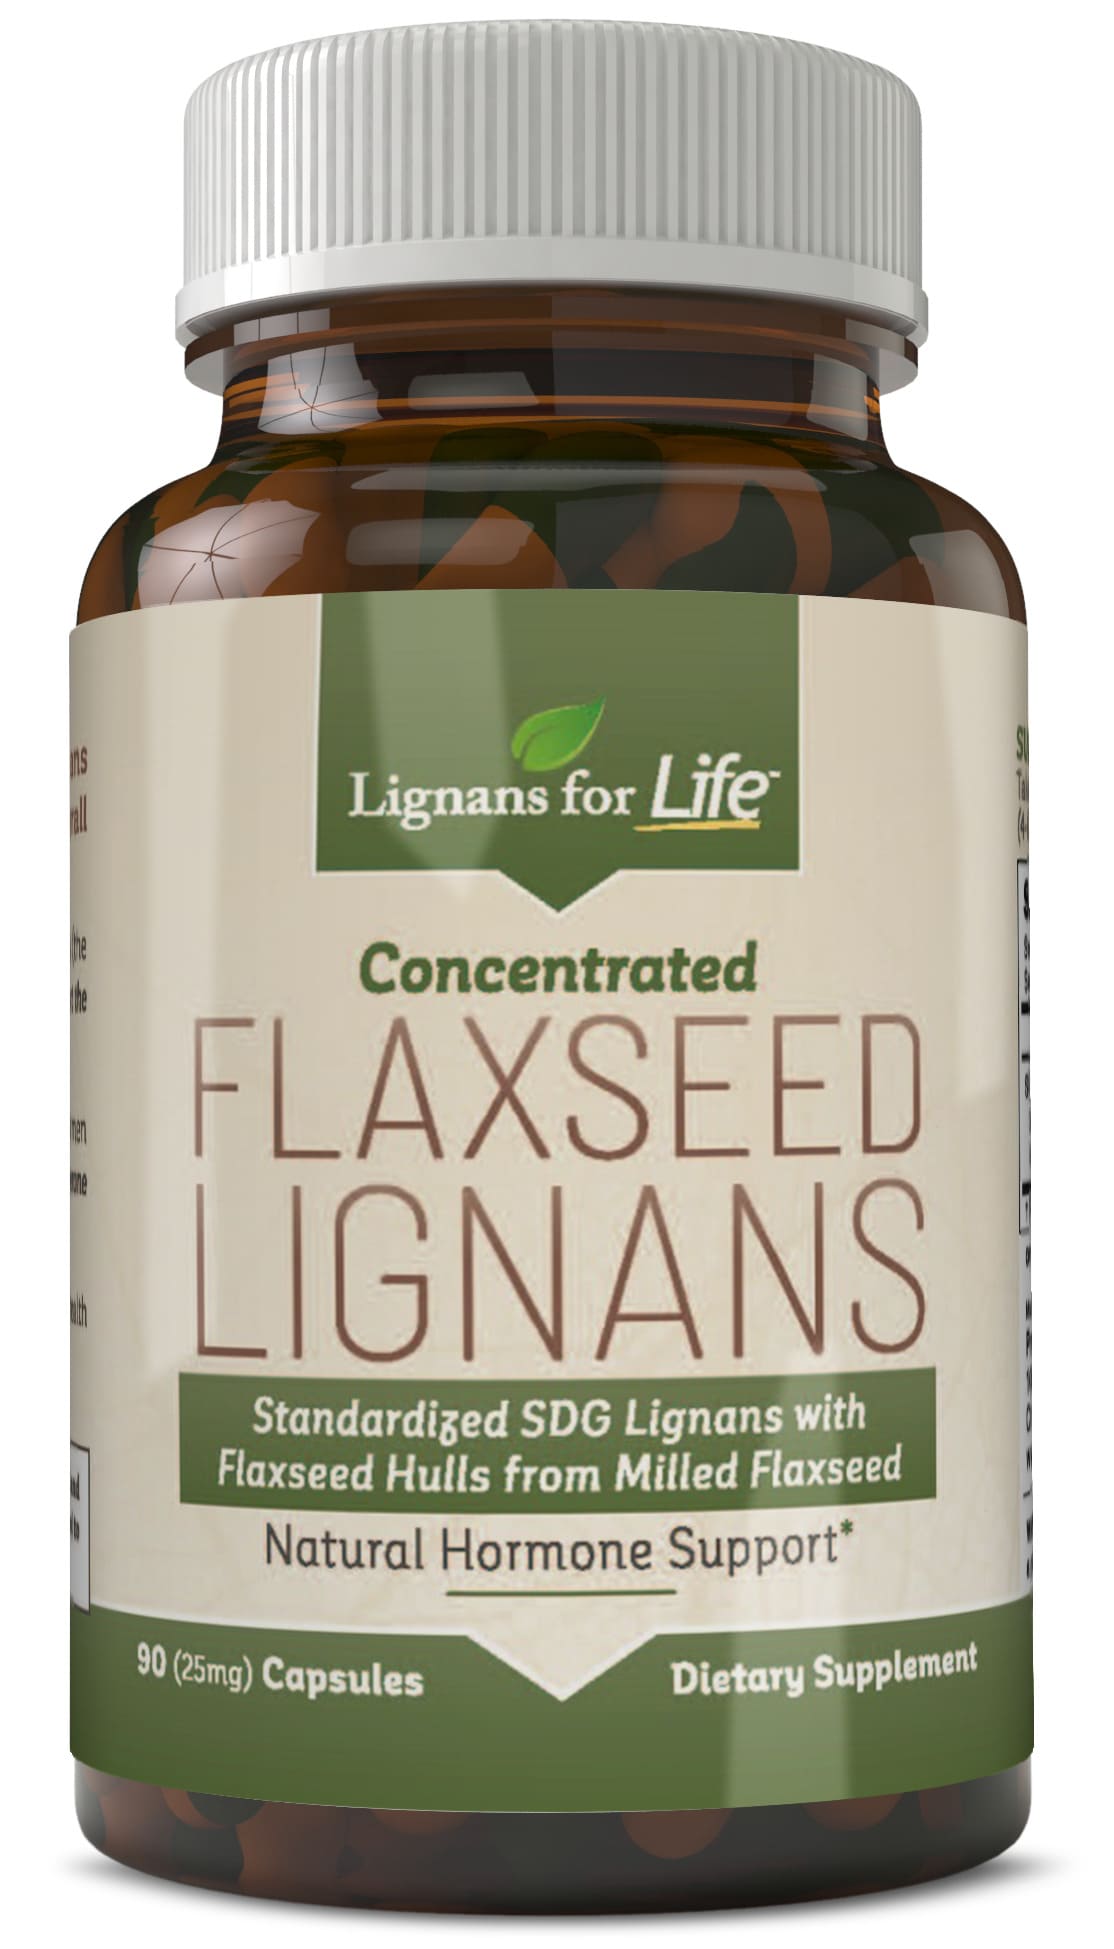 Lignans For Life Flaxseed Lignans